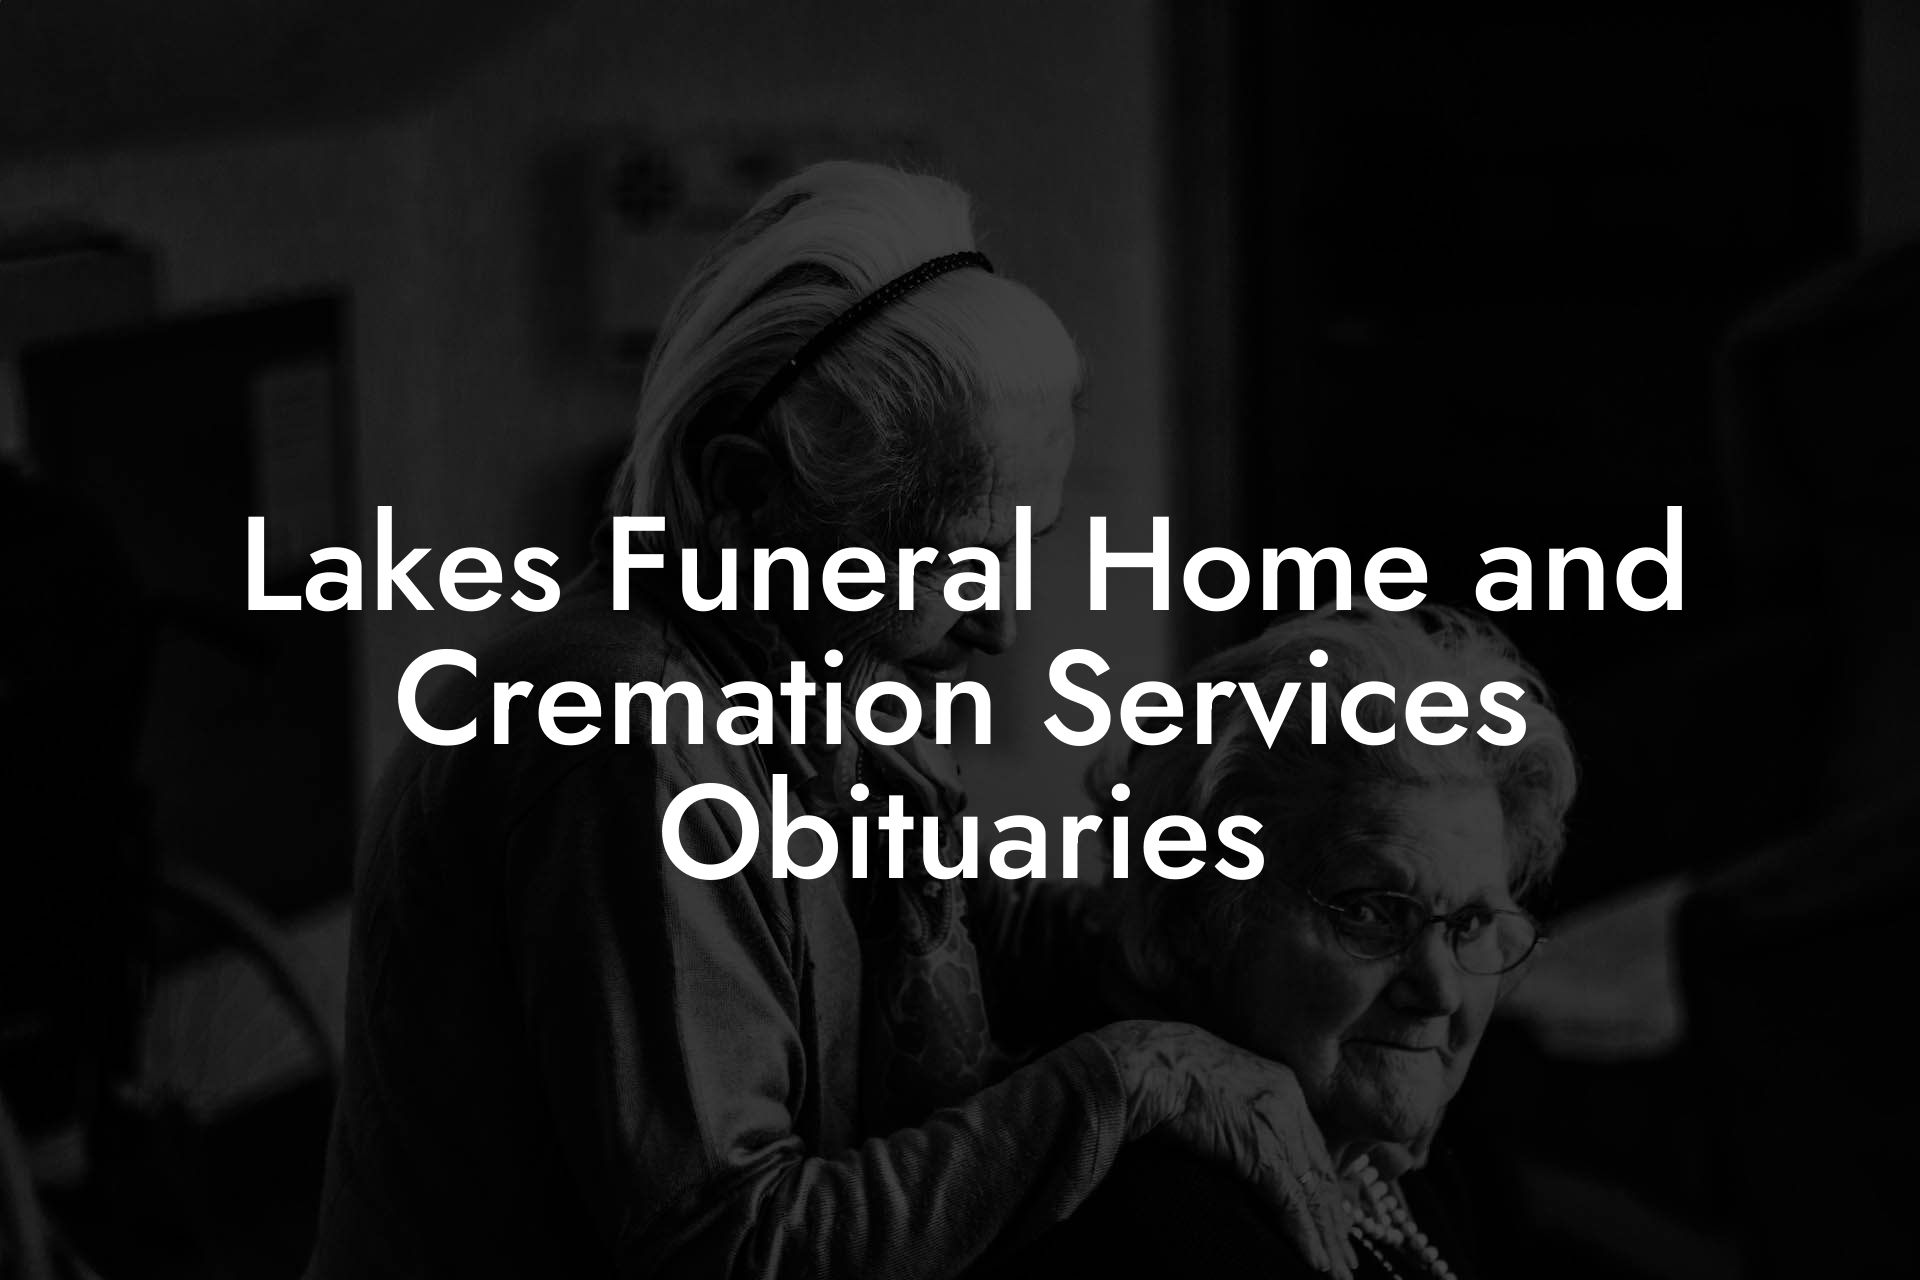 Lakes Funeral Home and Cremation Services Obituaries Eulogy Assistant